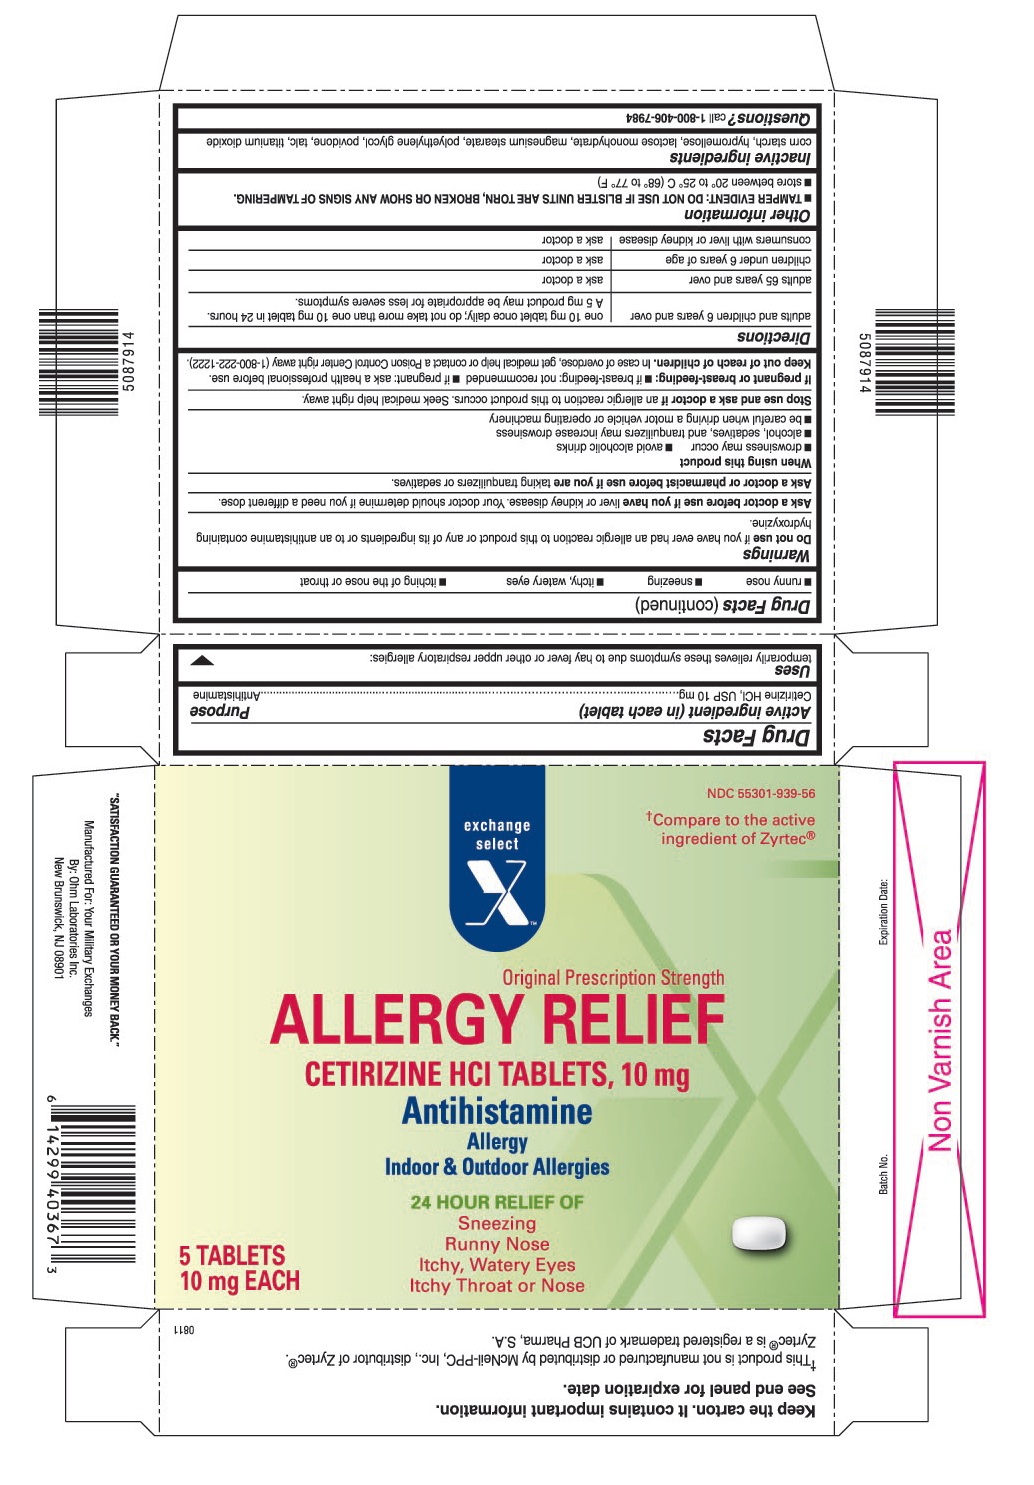 This is the 5 count blister carton label for Exchange Select Cetirizine HCl tablets, 10 mg.